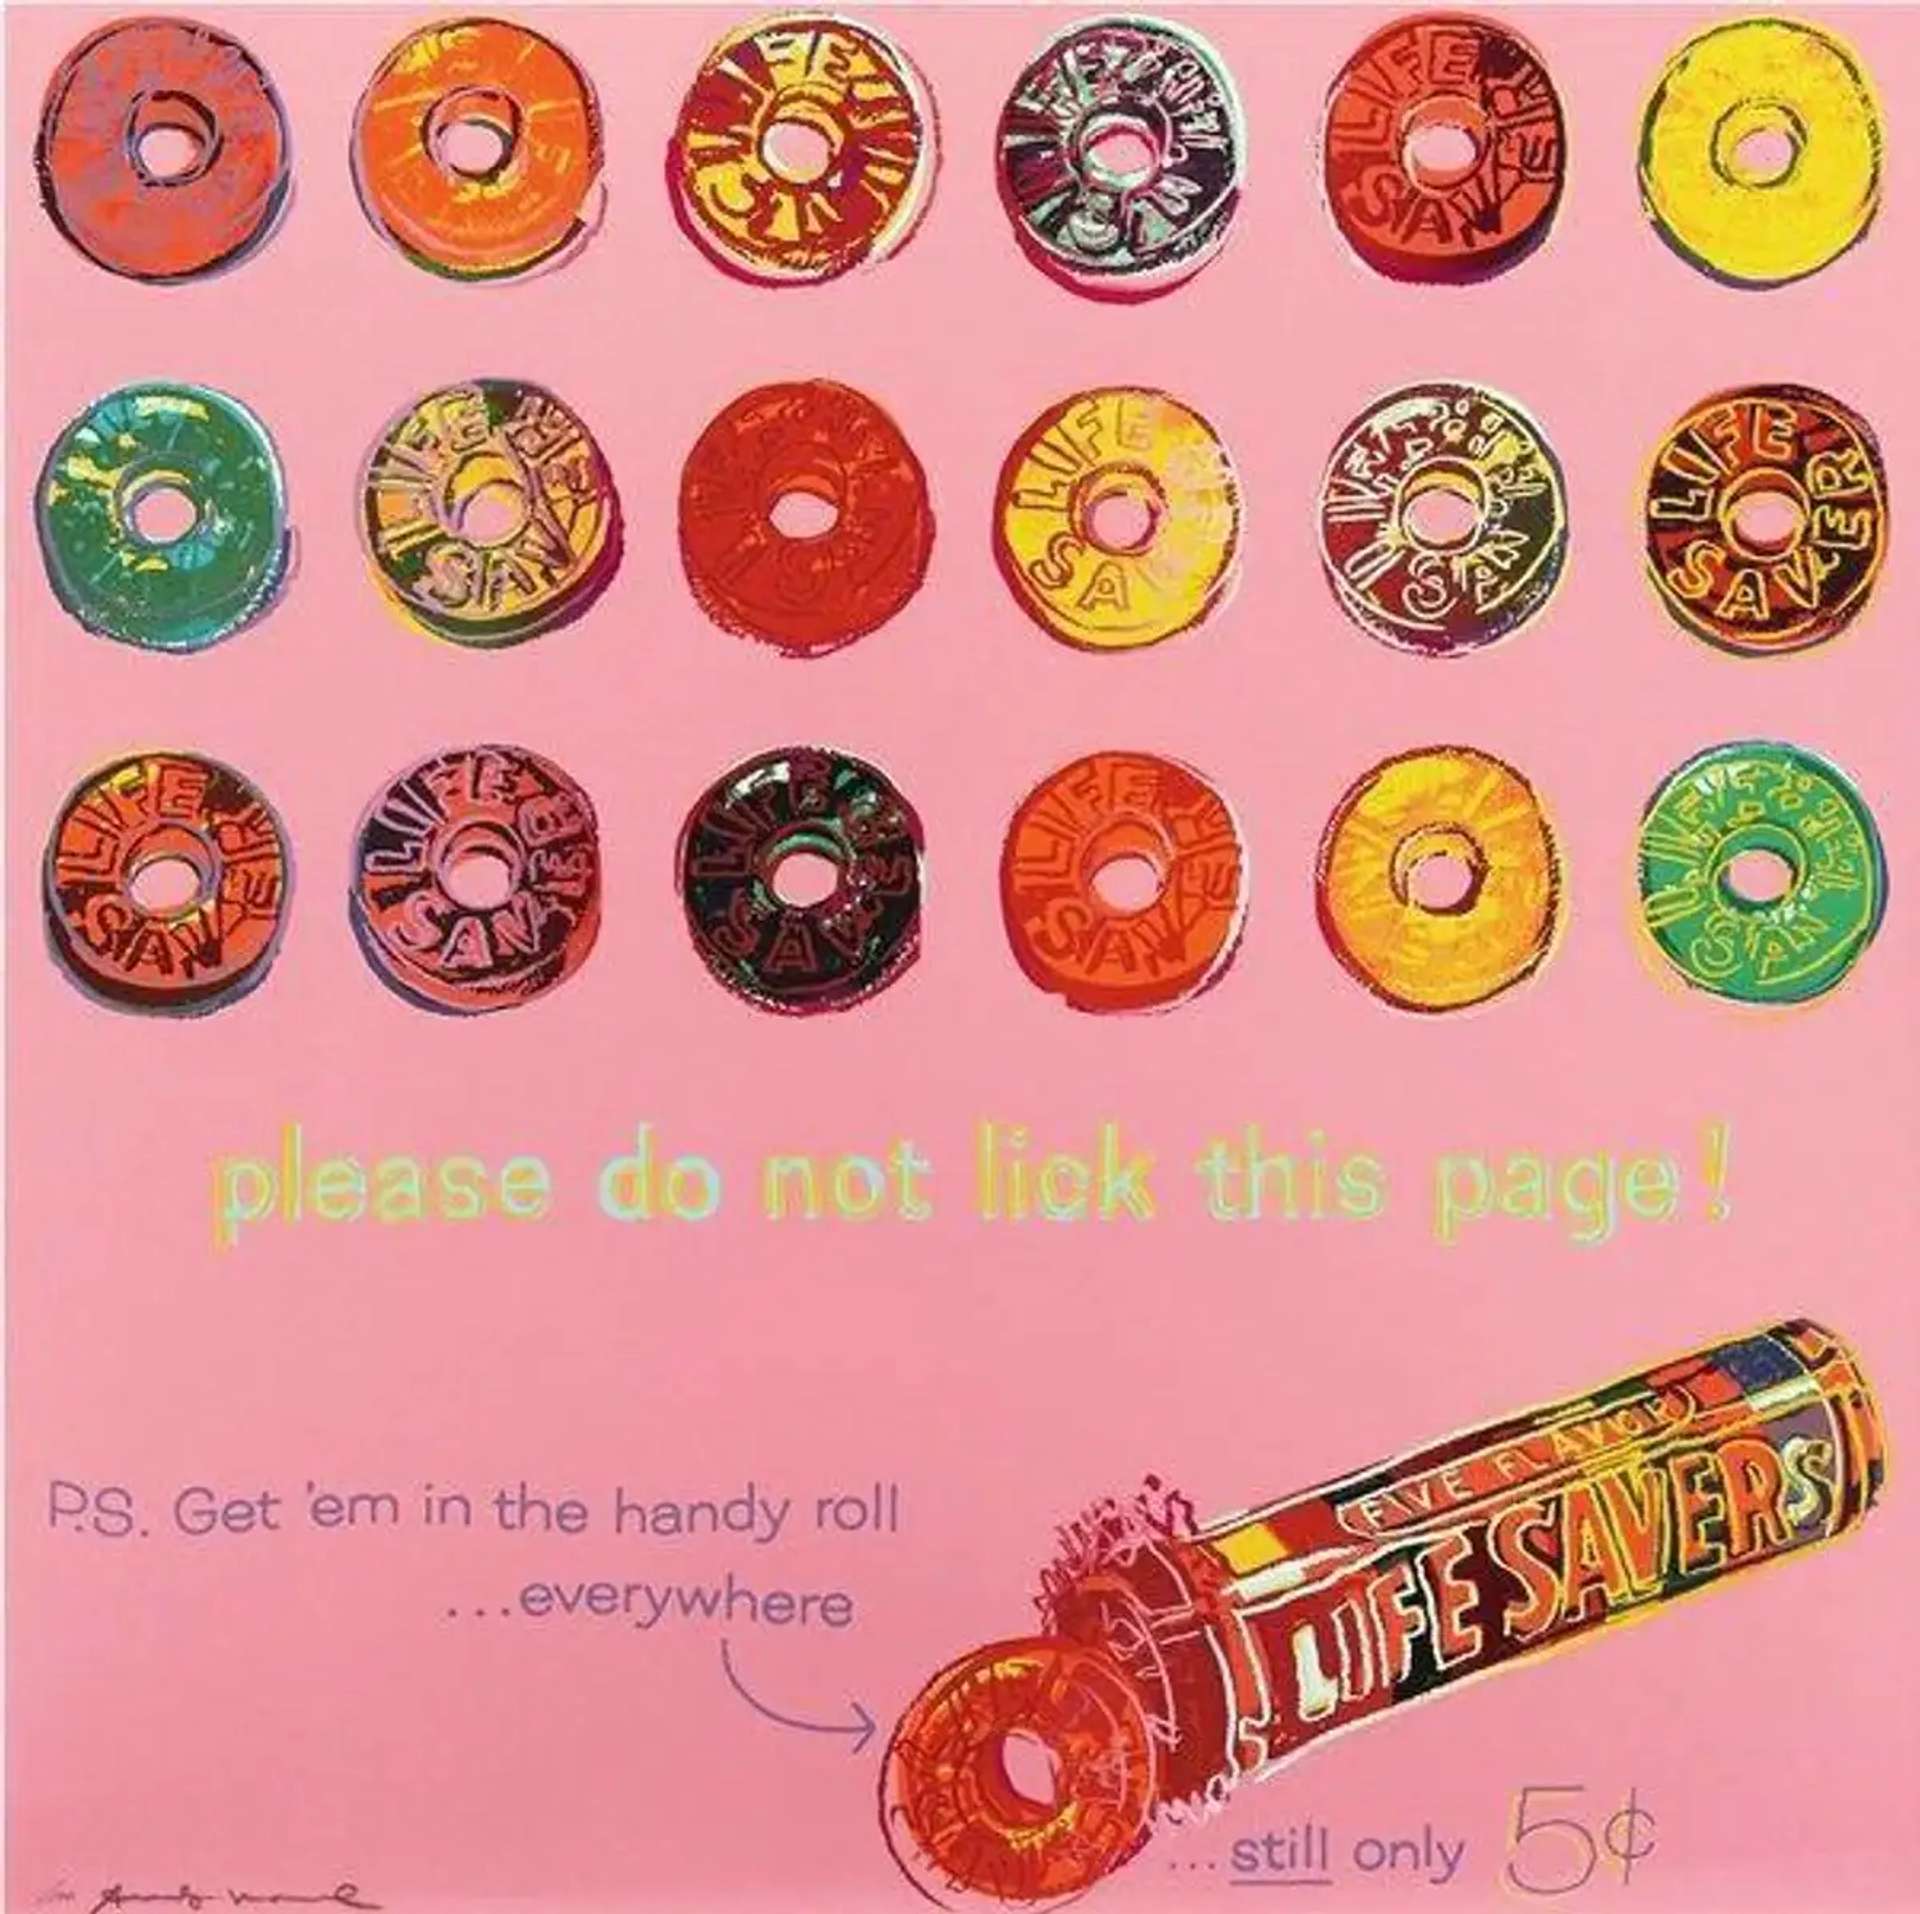 Advertisement of Life Savers in the style of Pop Art with a pink background